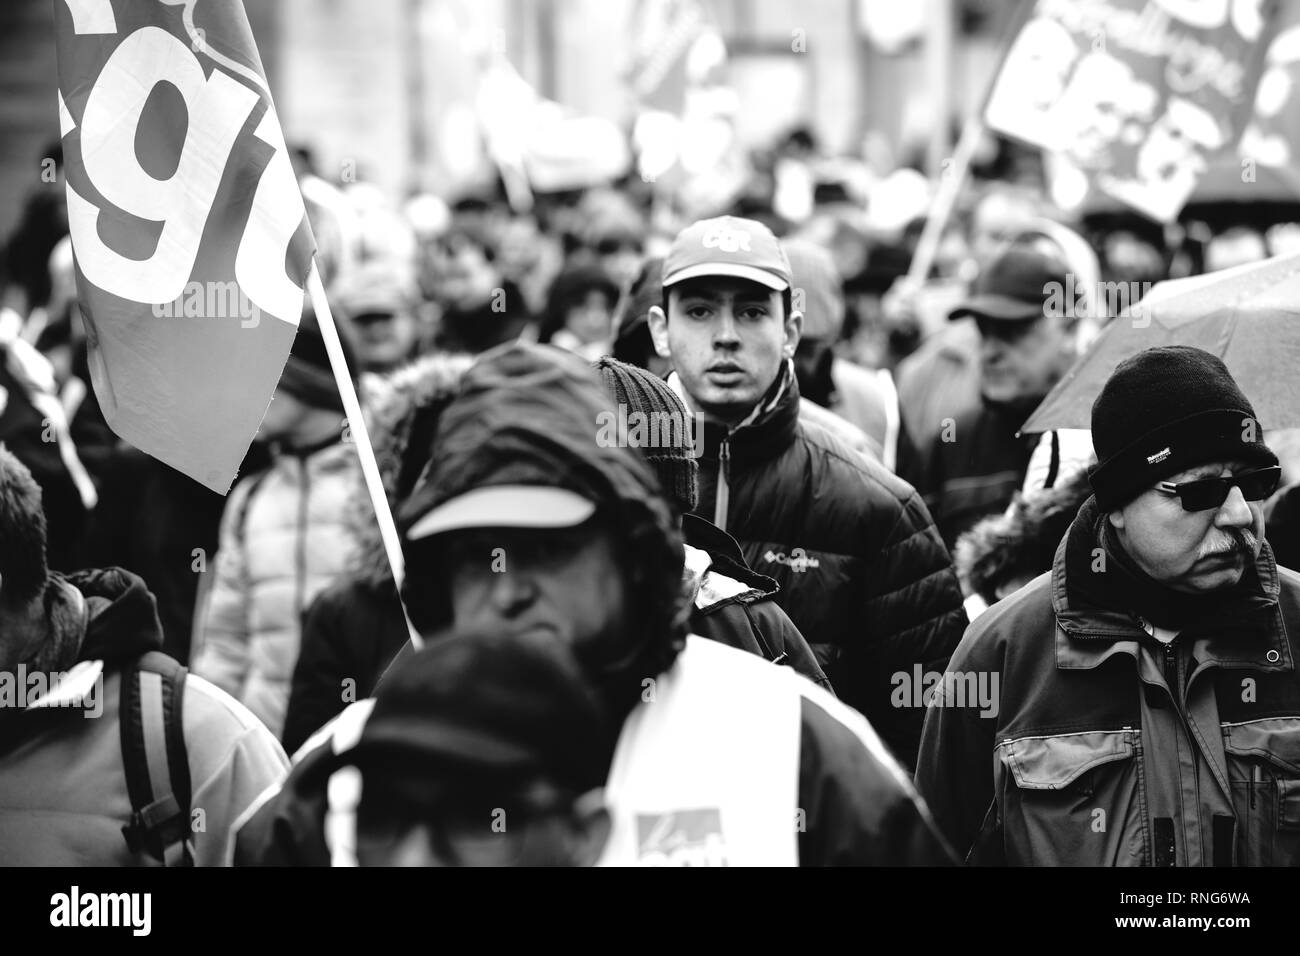 STRASBOURG, FRANCE - MAR 22, 2018: CGT General Confederation of Labour workers with placard at demonstration protest against Macron French government string of reforms - black and white people marching Stock Photo